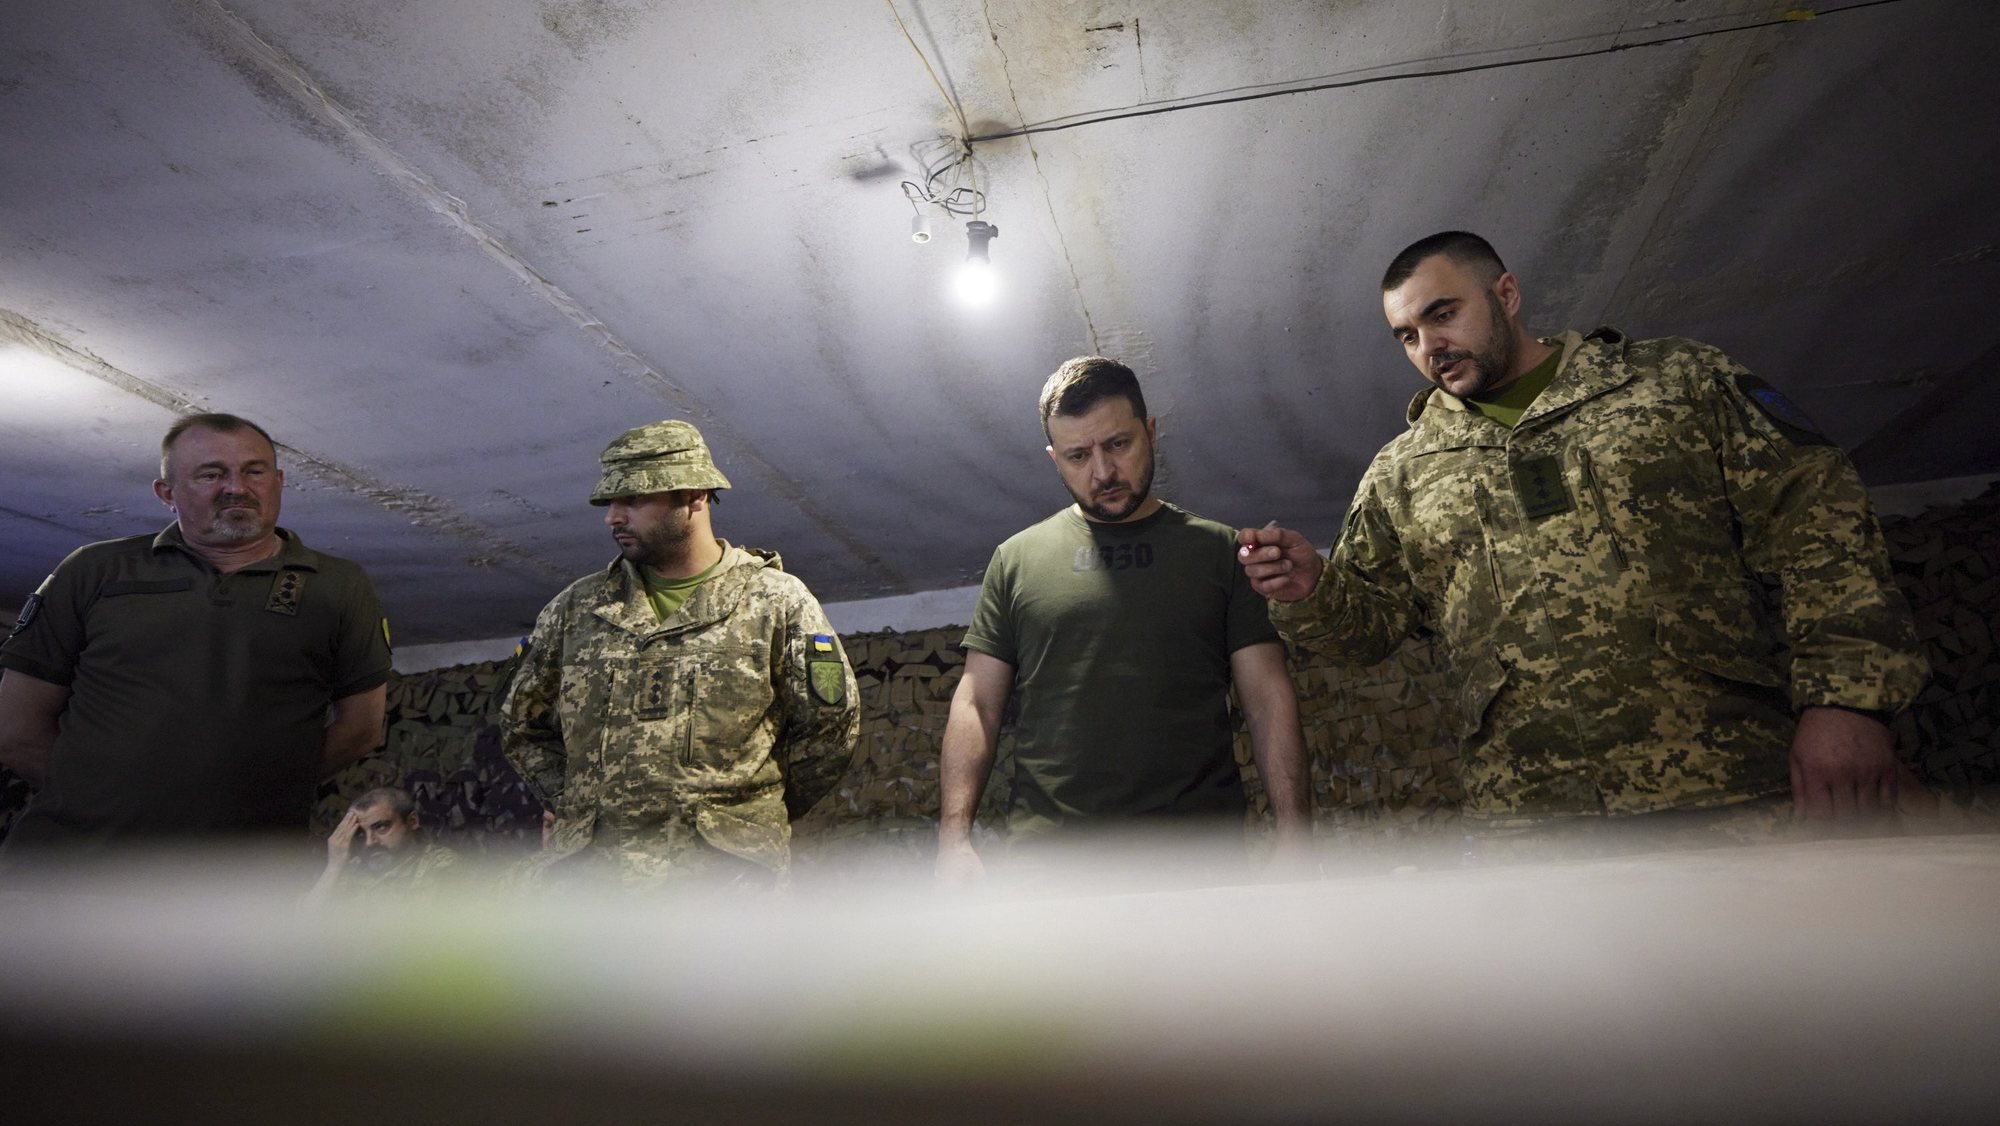 epa09998210 A handout picture made available by the presidential press service shows Ukrainian President Volodymyr Zelensky (C-R) speaking with servicemen during his visit to a frontline in the Zaporizhia area, Ukraine, 05 June 2022. Zelensky got himself updated on the operational situation at the line of defense amid the Russian invasion. Russian troops had invaded Ukraine on 24 February, starting a conflict that provoked fighting, destruction and a humanitarian crisis since.  EPA/PRESIDENTIAL PRESS SERVICE HANDOUT HANDOUT  HANDOUT EDITORIAL USE ONLY/NO SALES